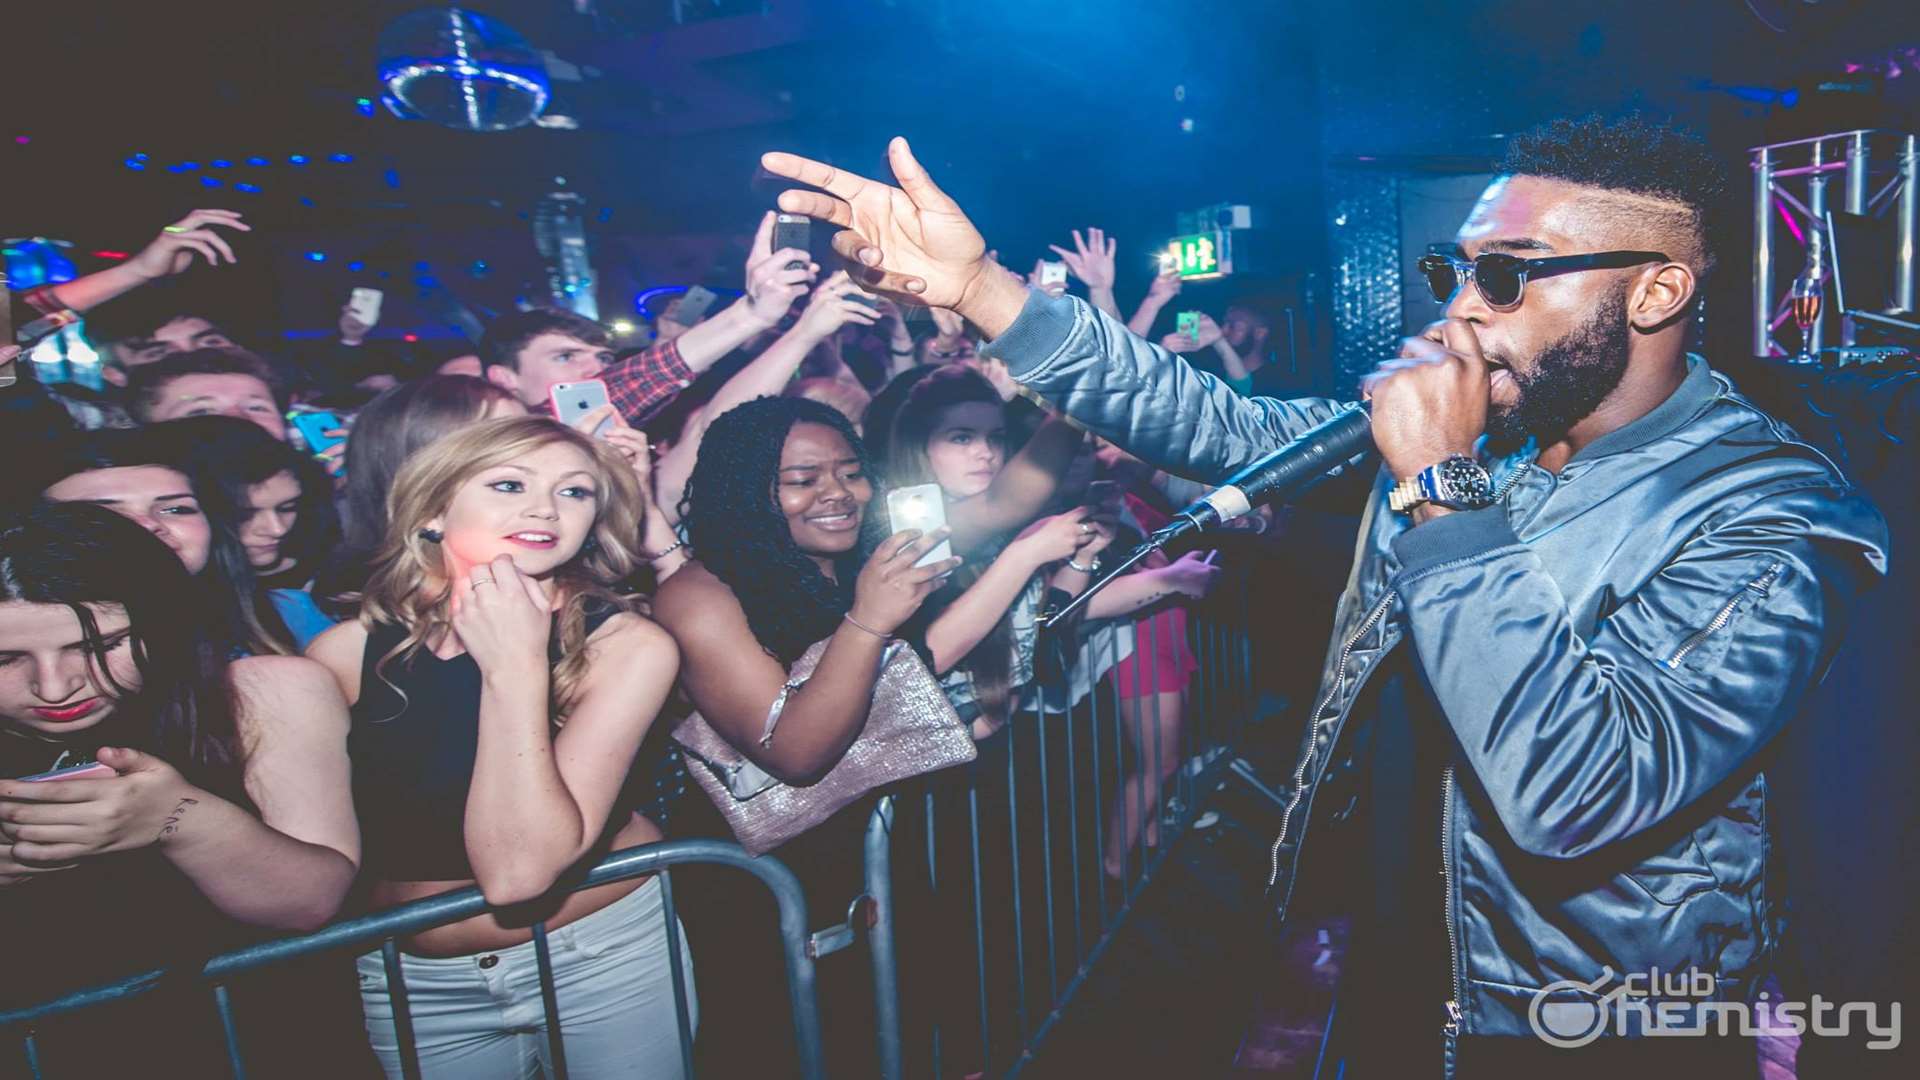 Tinie Tempah during his short set at Club Chemistry last night. Picture: Club Chemistry.